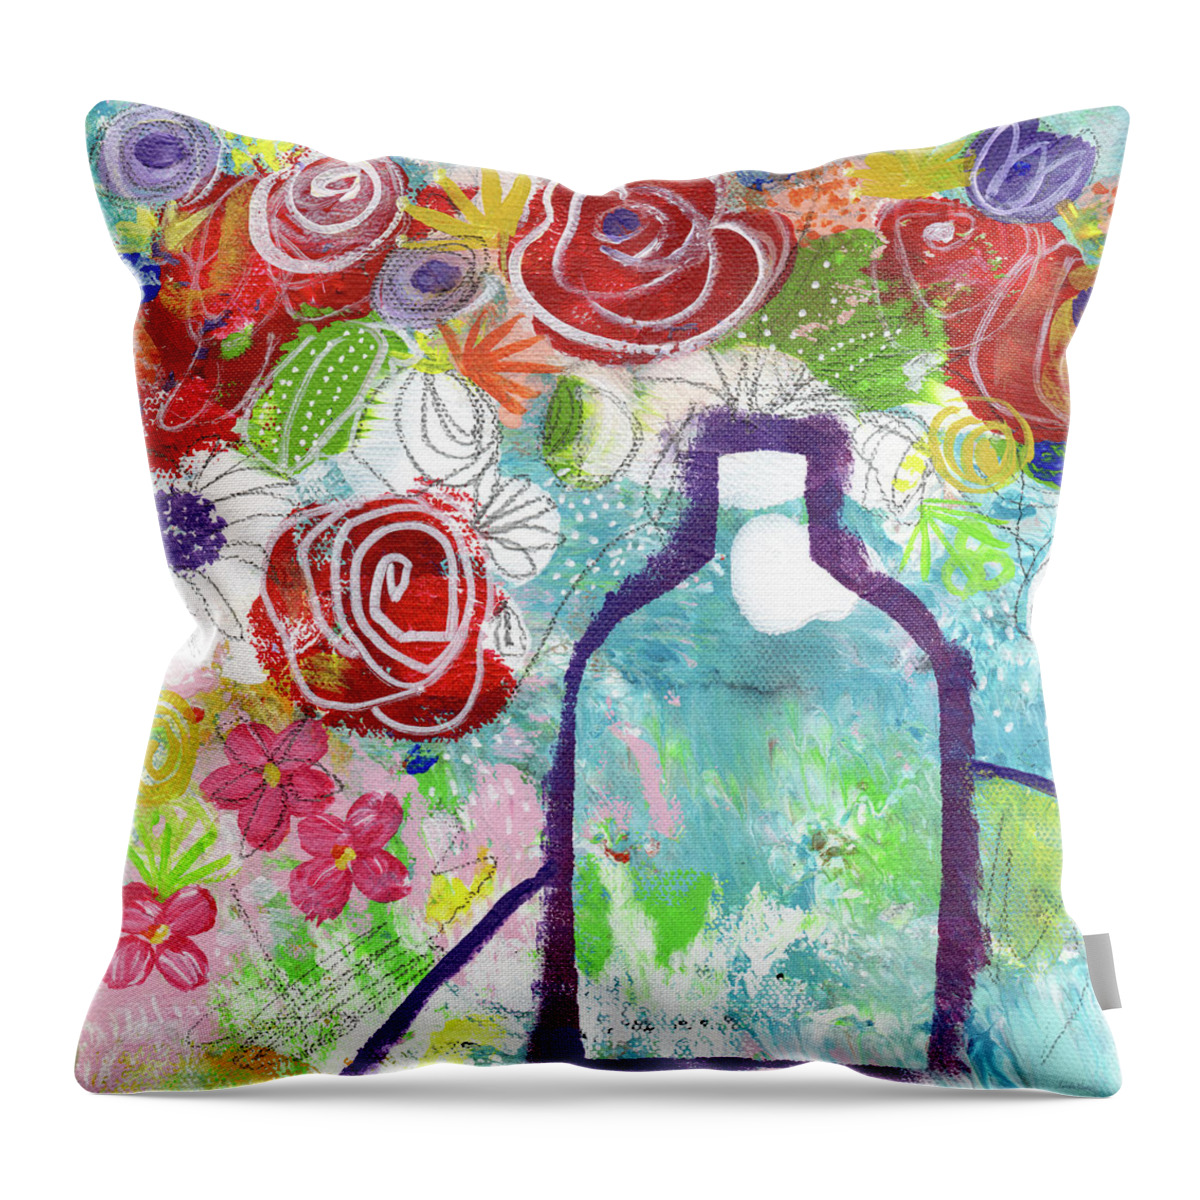 Floral Throw Pillow featuring the painting Sunday Market Flowers 2- Art by Linda Woods by Linda Woods